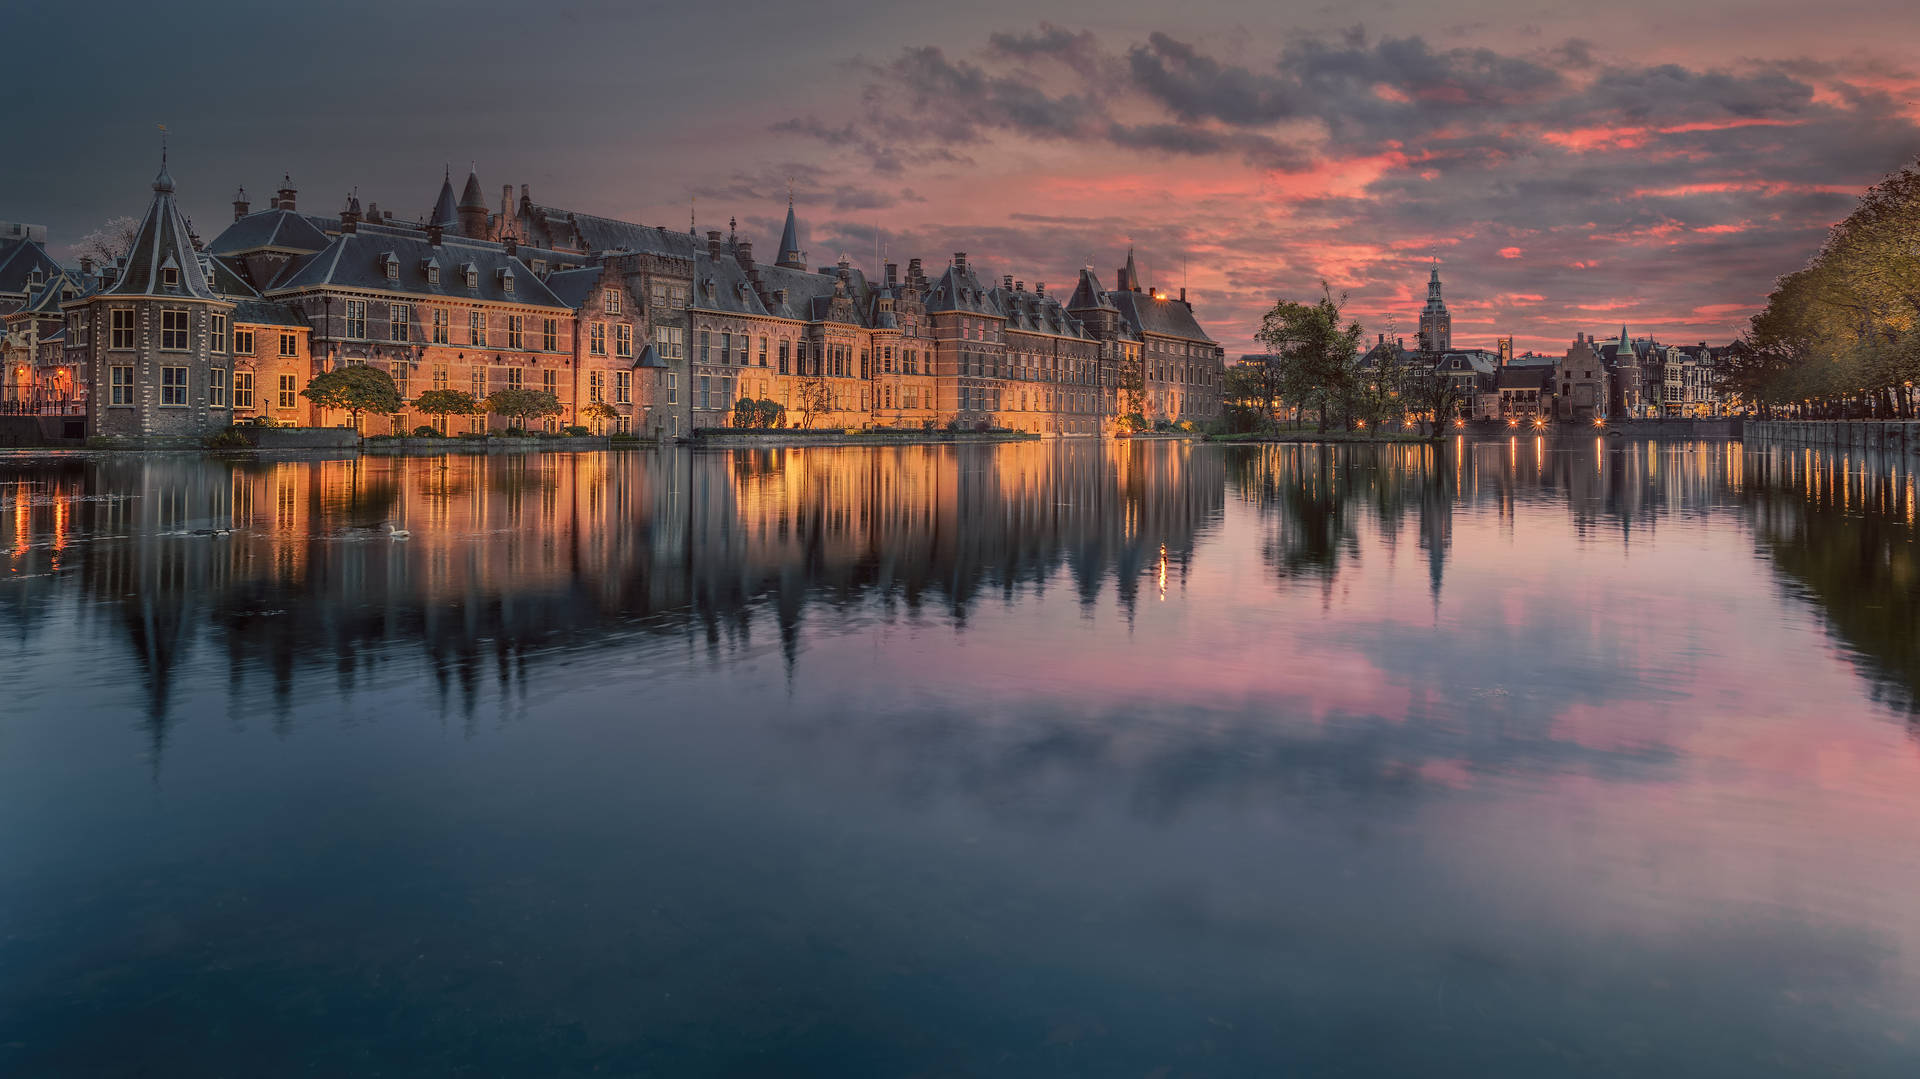 Peaceful Reflections at a Beautiful Castle Wallpaper